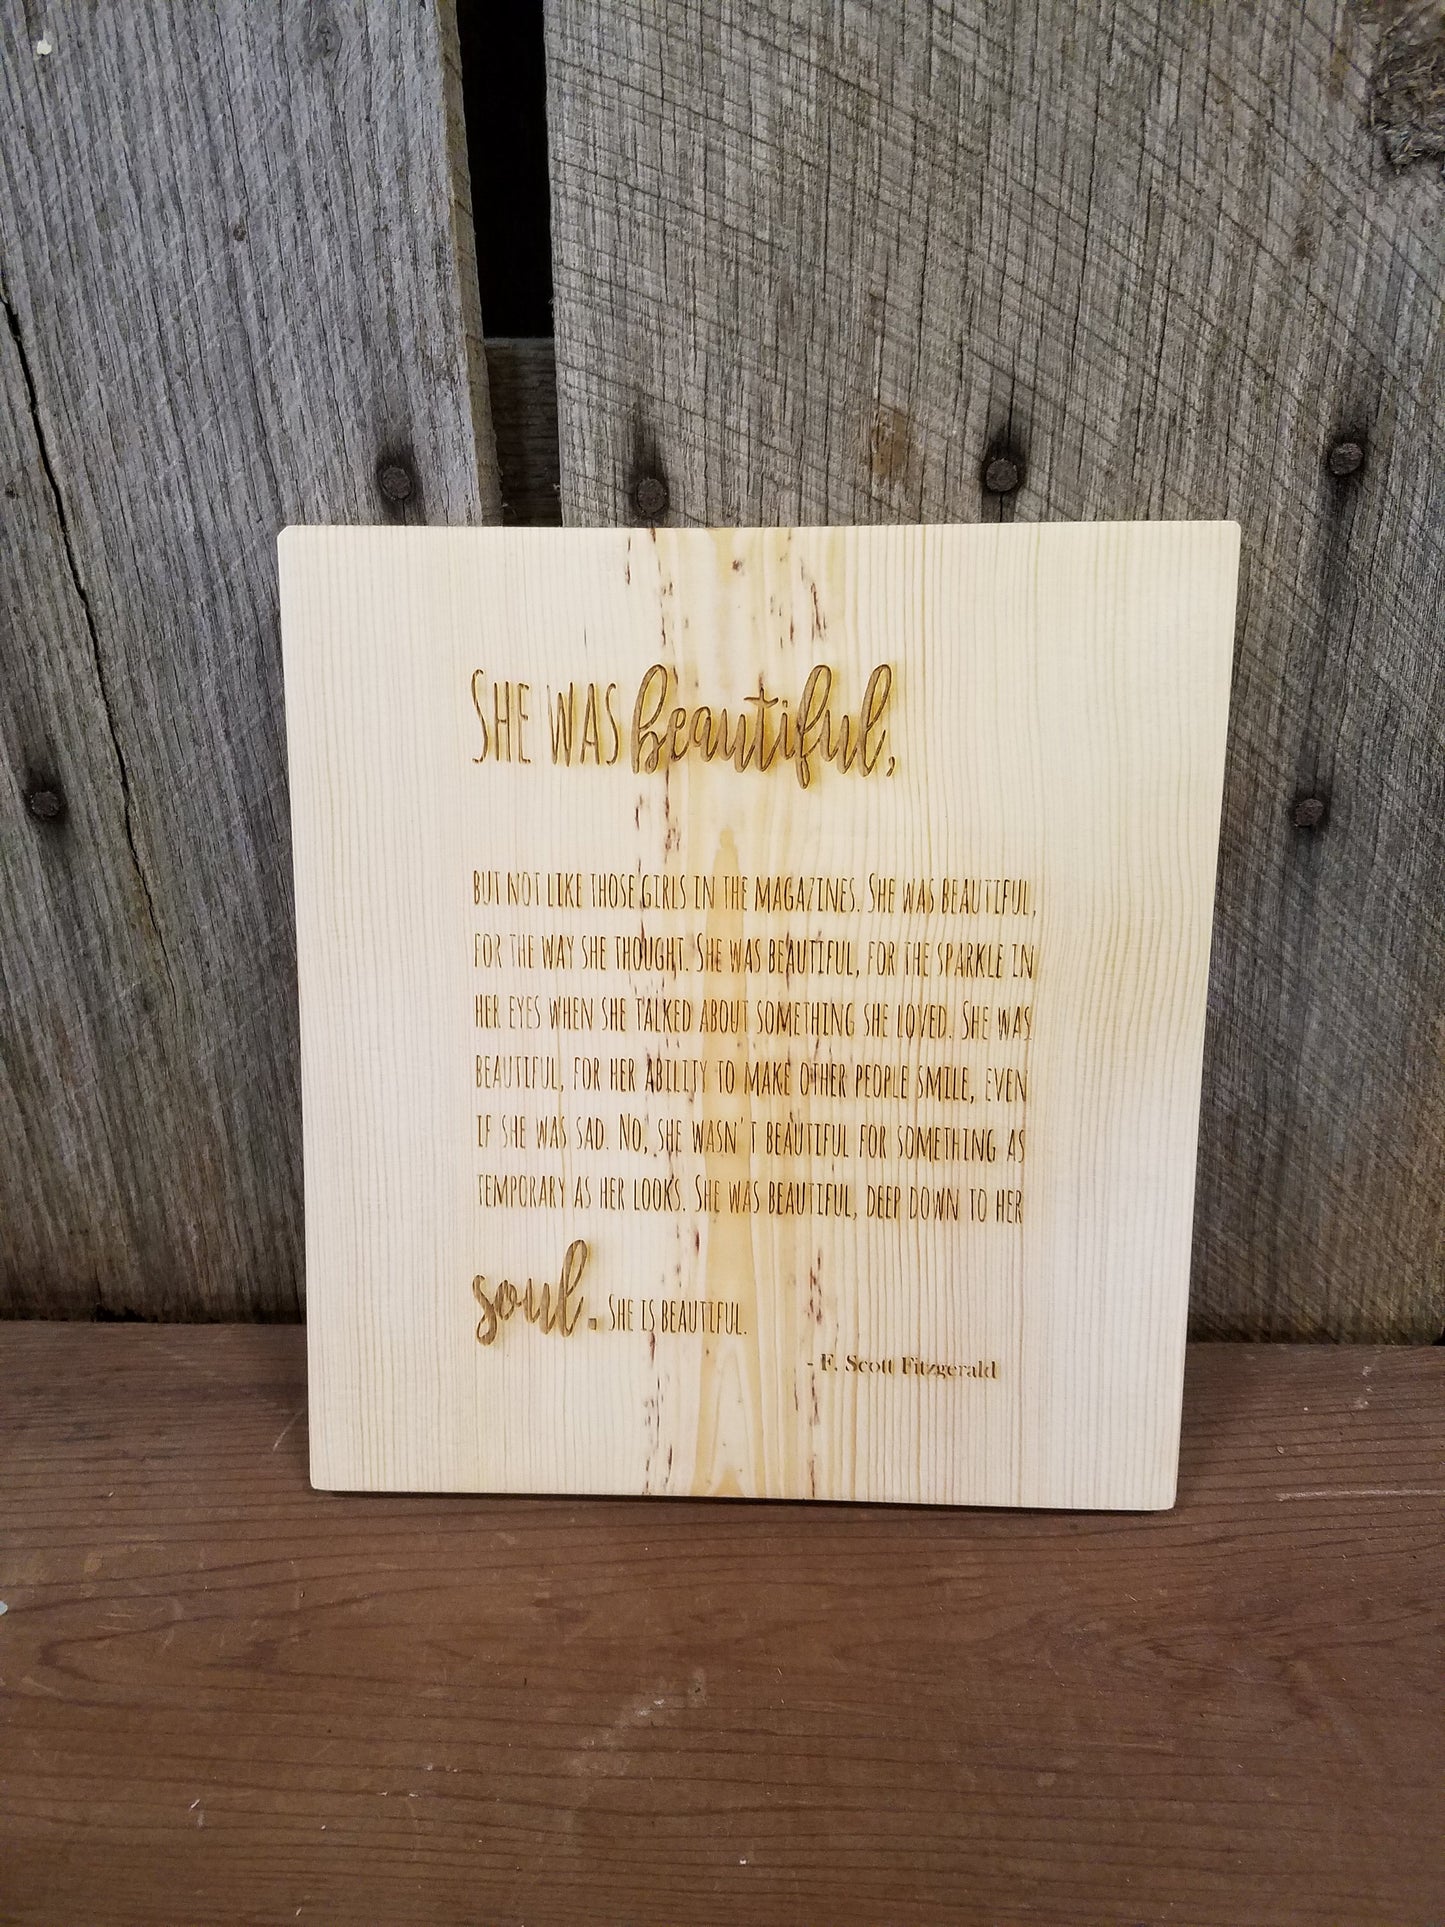 She Was Beautiful, F Scott Fitzgerald, Fitzgerald, Handmade Sign, Poem, Quote, Rustic, Wood, Laser Engraved, Primitive